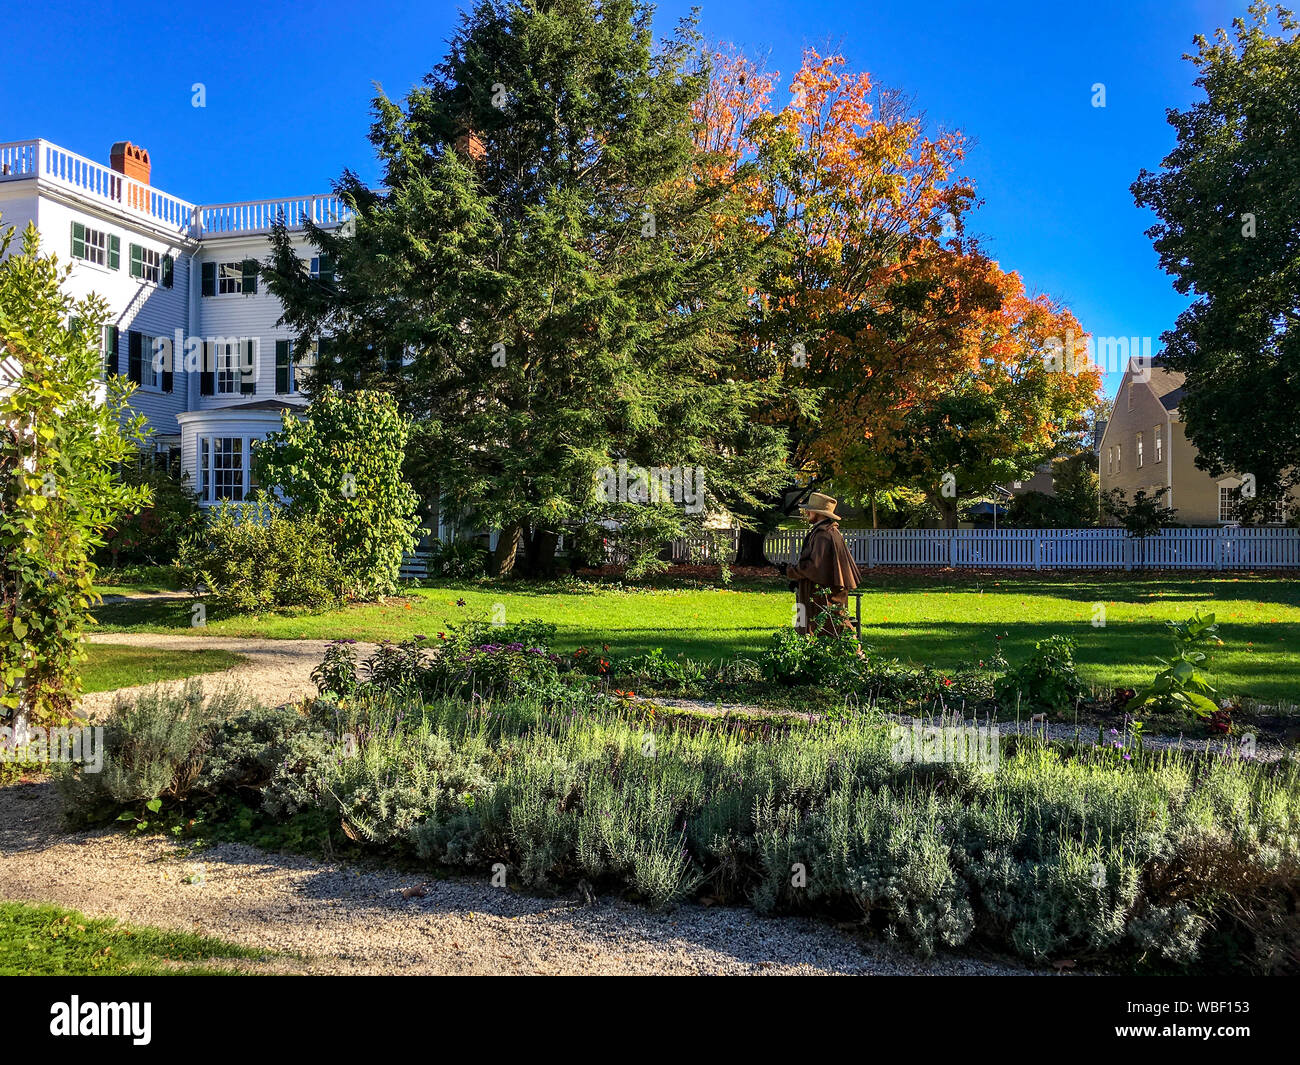 Portsmouth, NH / USA - Oct 16, 2018: Historical roleplayer dressed in period costume, wearing a greatcoat, walks on the grounds of Strawbery Banke. Stock Photo